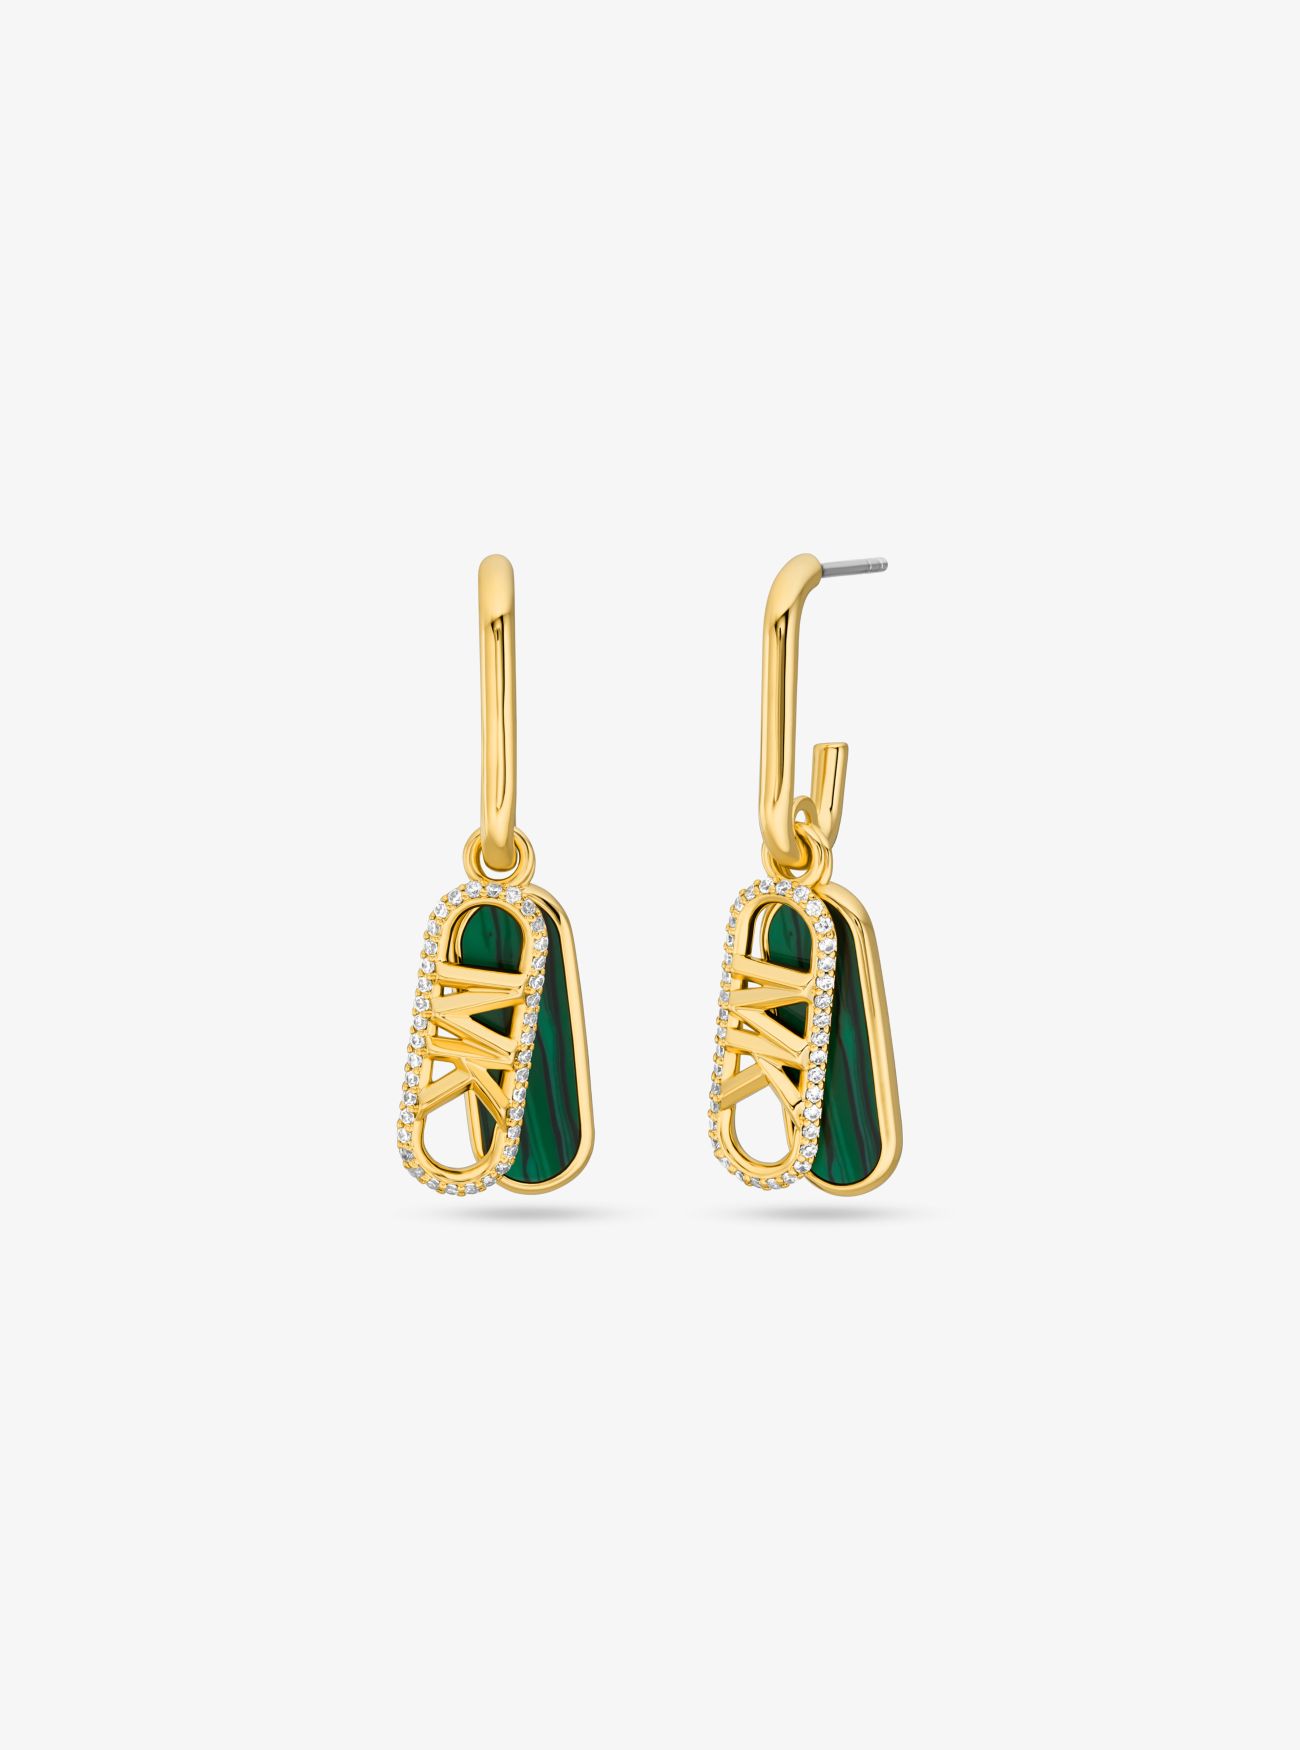 MK Precious Metal-Plated Brass and Acetate Pavé Empire Link Earrings - Gold - Michael Kors